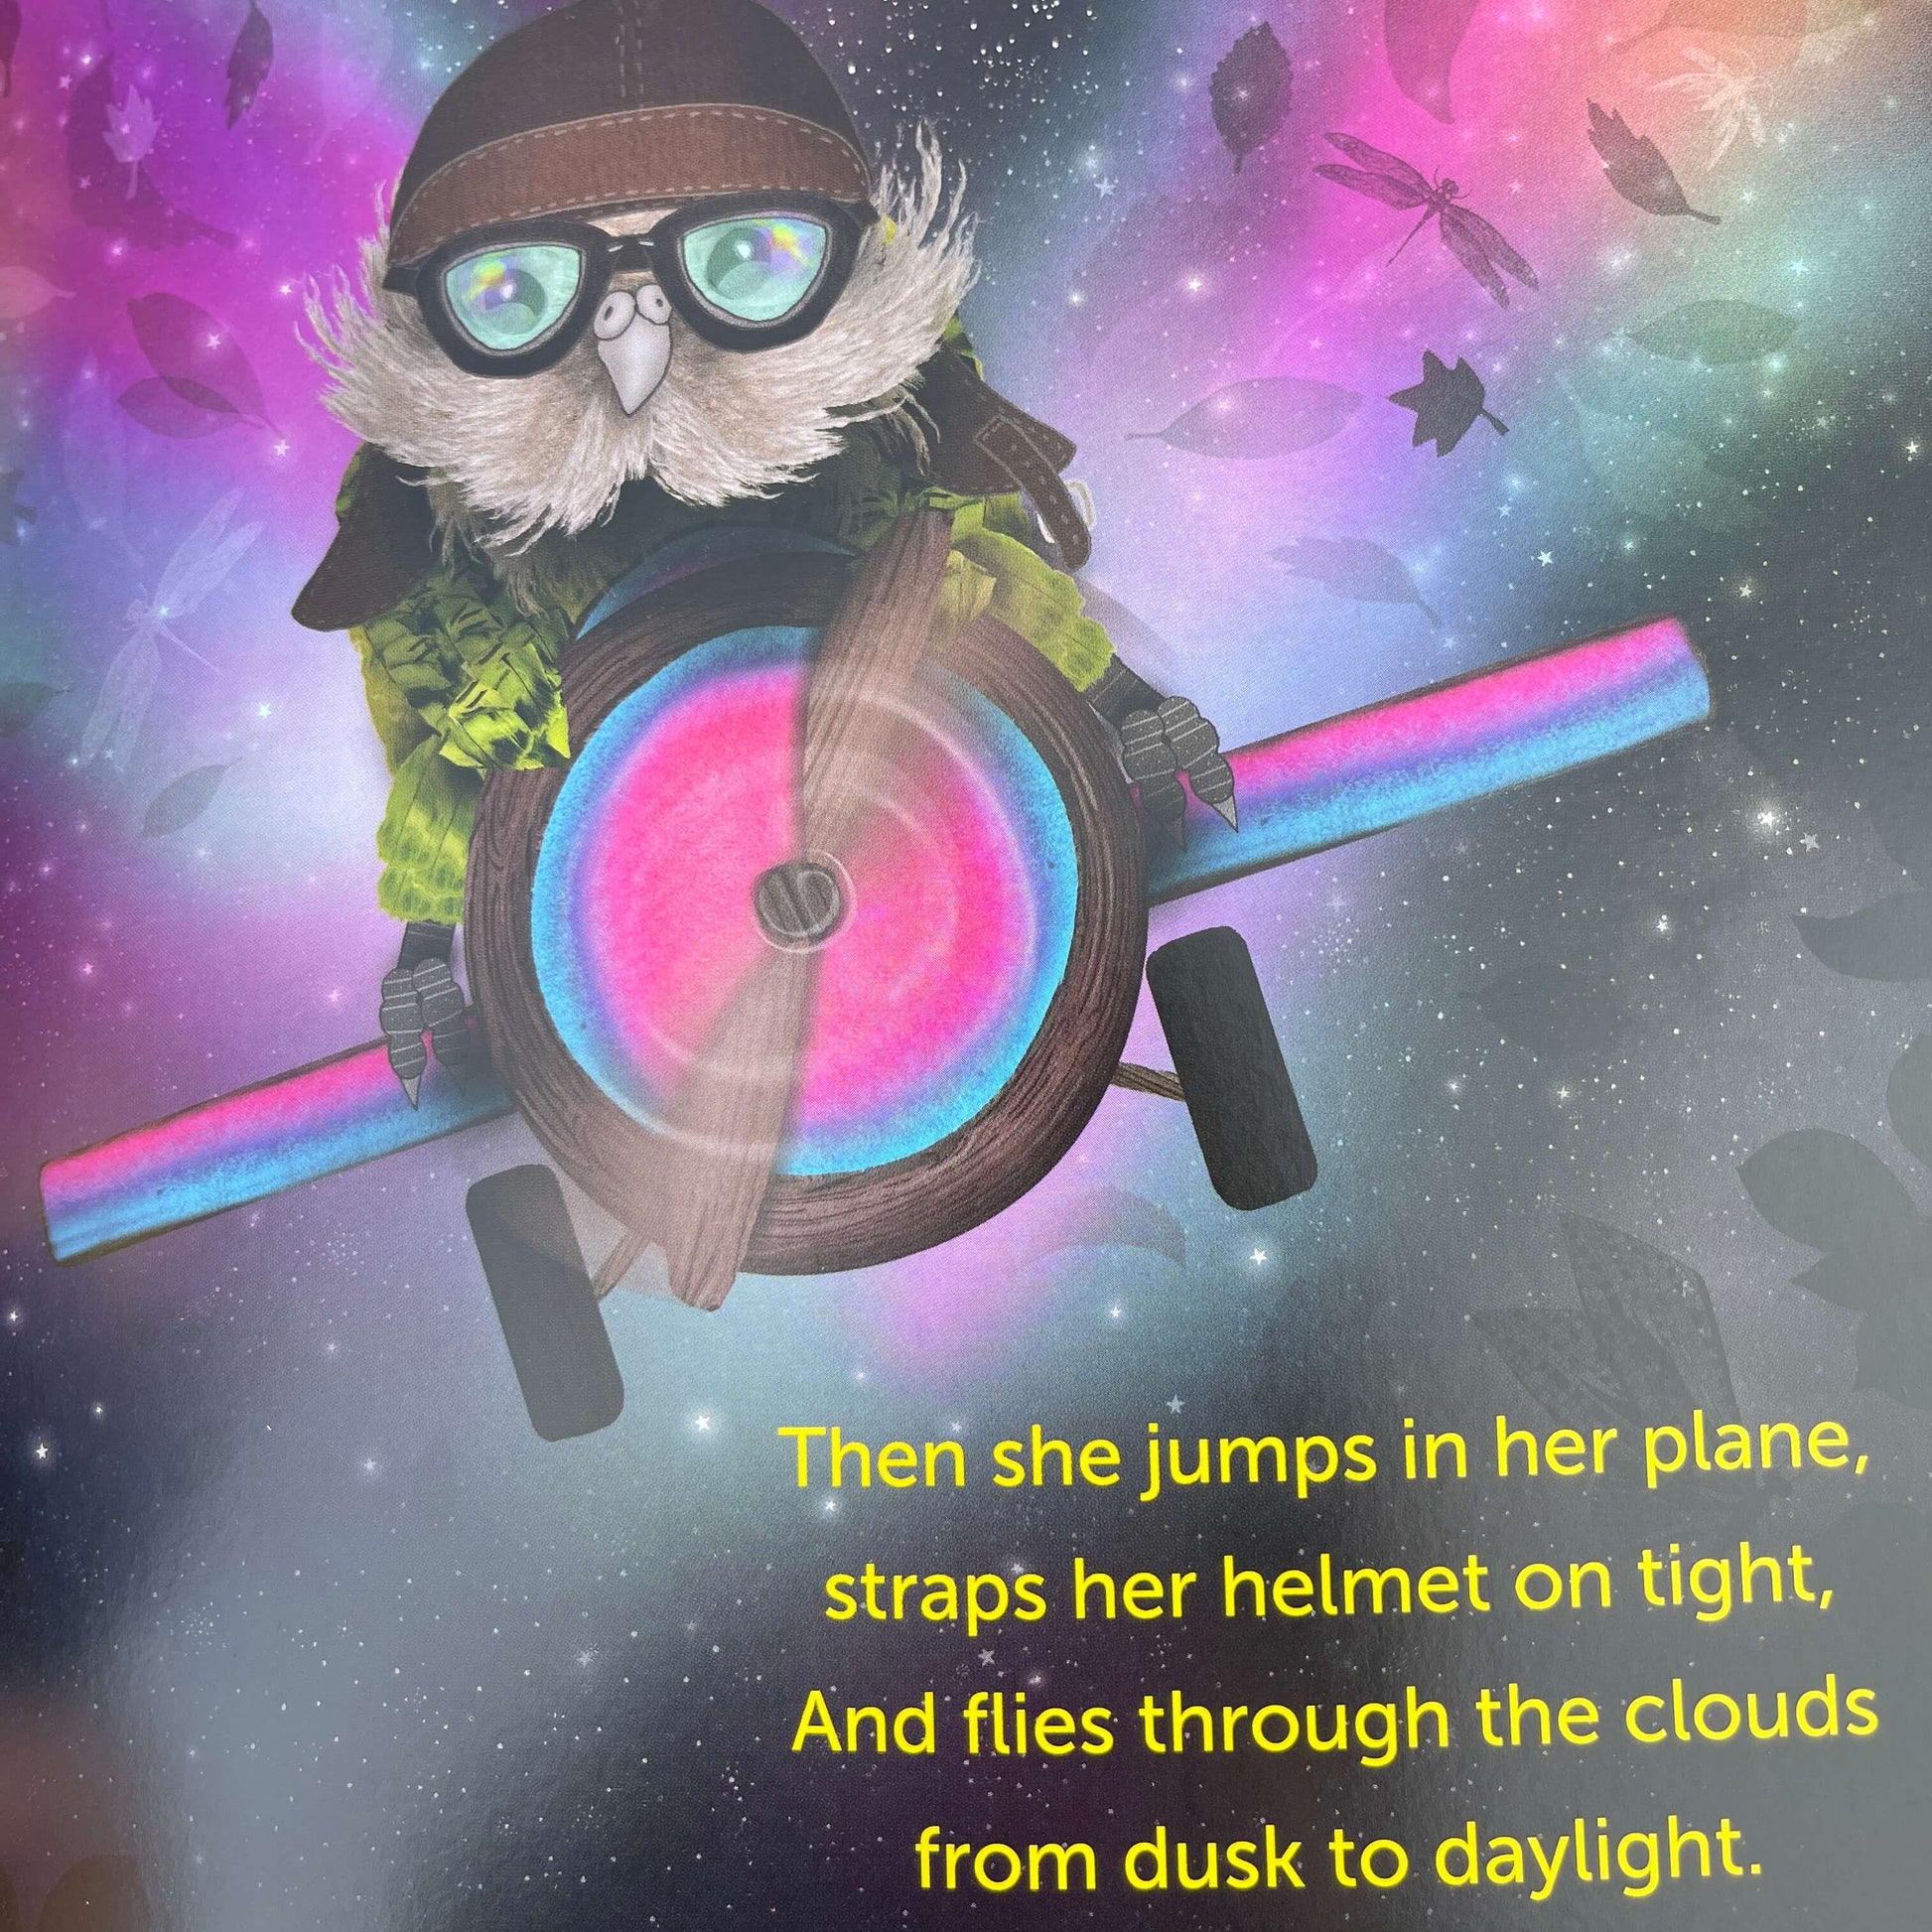 Page from the book Kara and the Kakapo by Danni Rae.